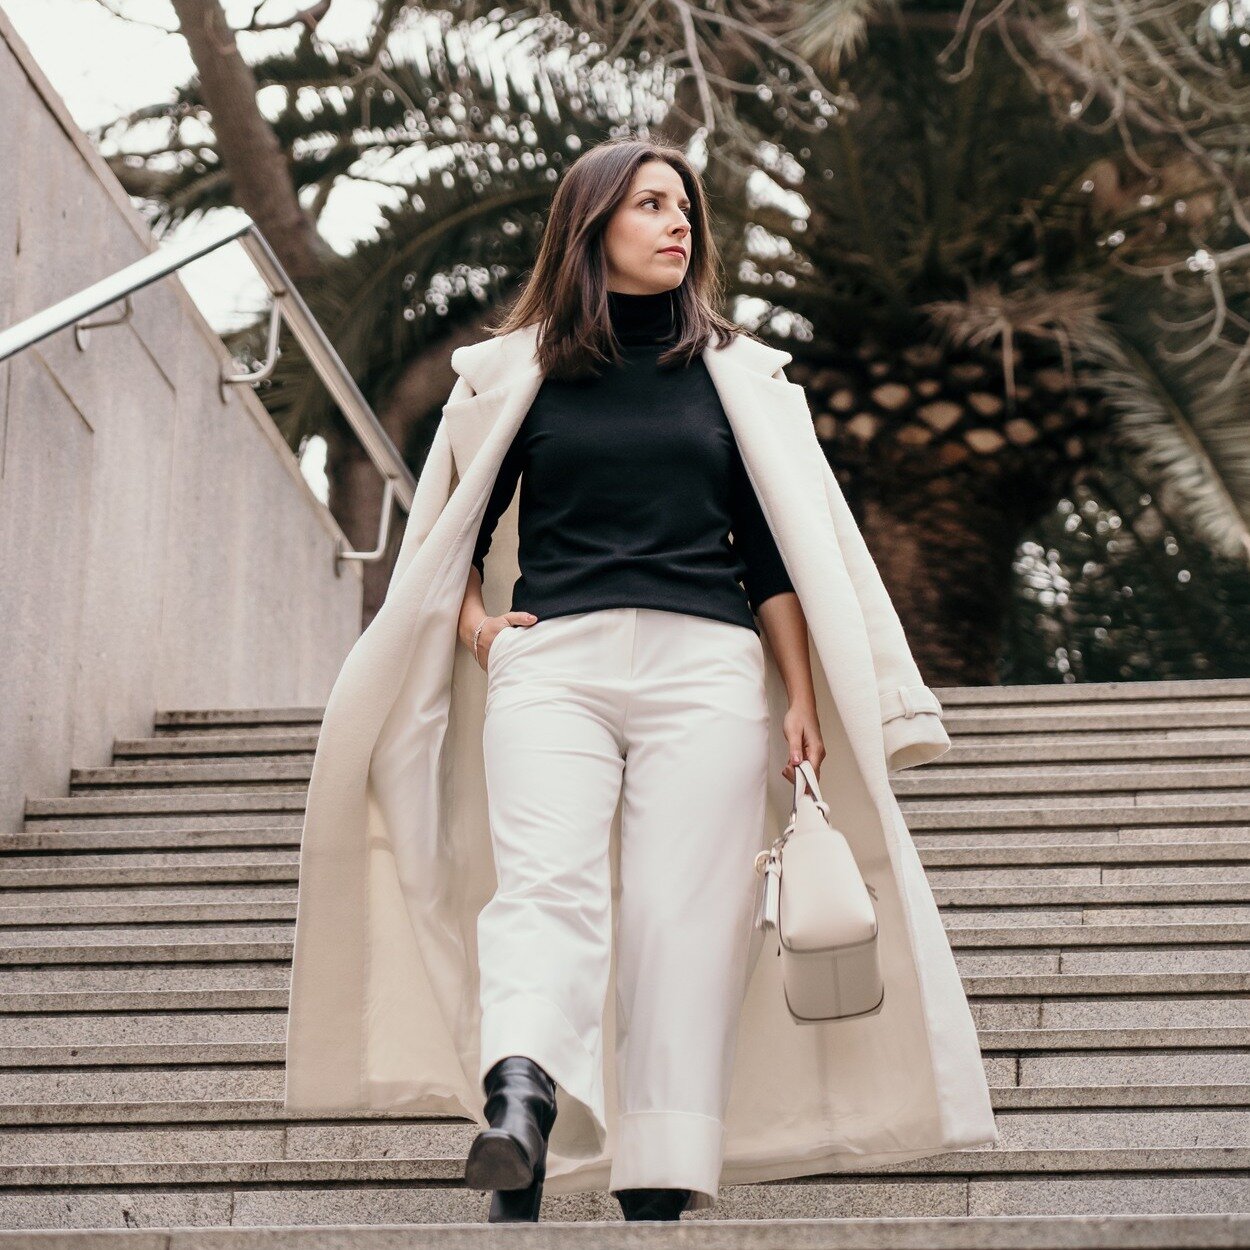 Discover the style that makes you feel comfortable, elegant, and empowered with our New Era collection ✨ At Alon&iacute;a, we believe in building a wardrobe that reflects your authenticity and makes you feel incredible in every moment.

#SlowFashion 